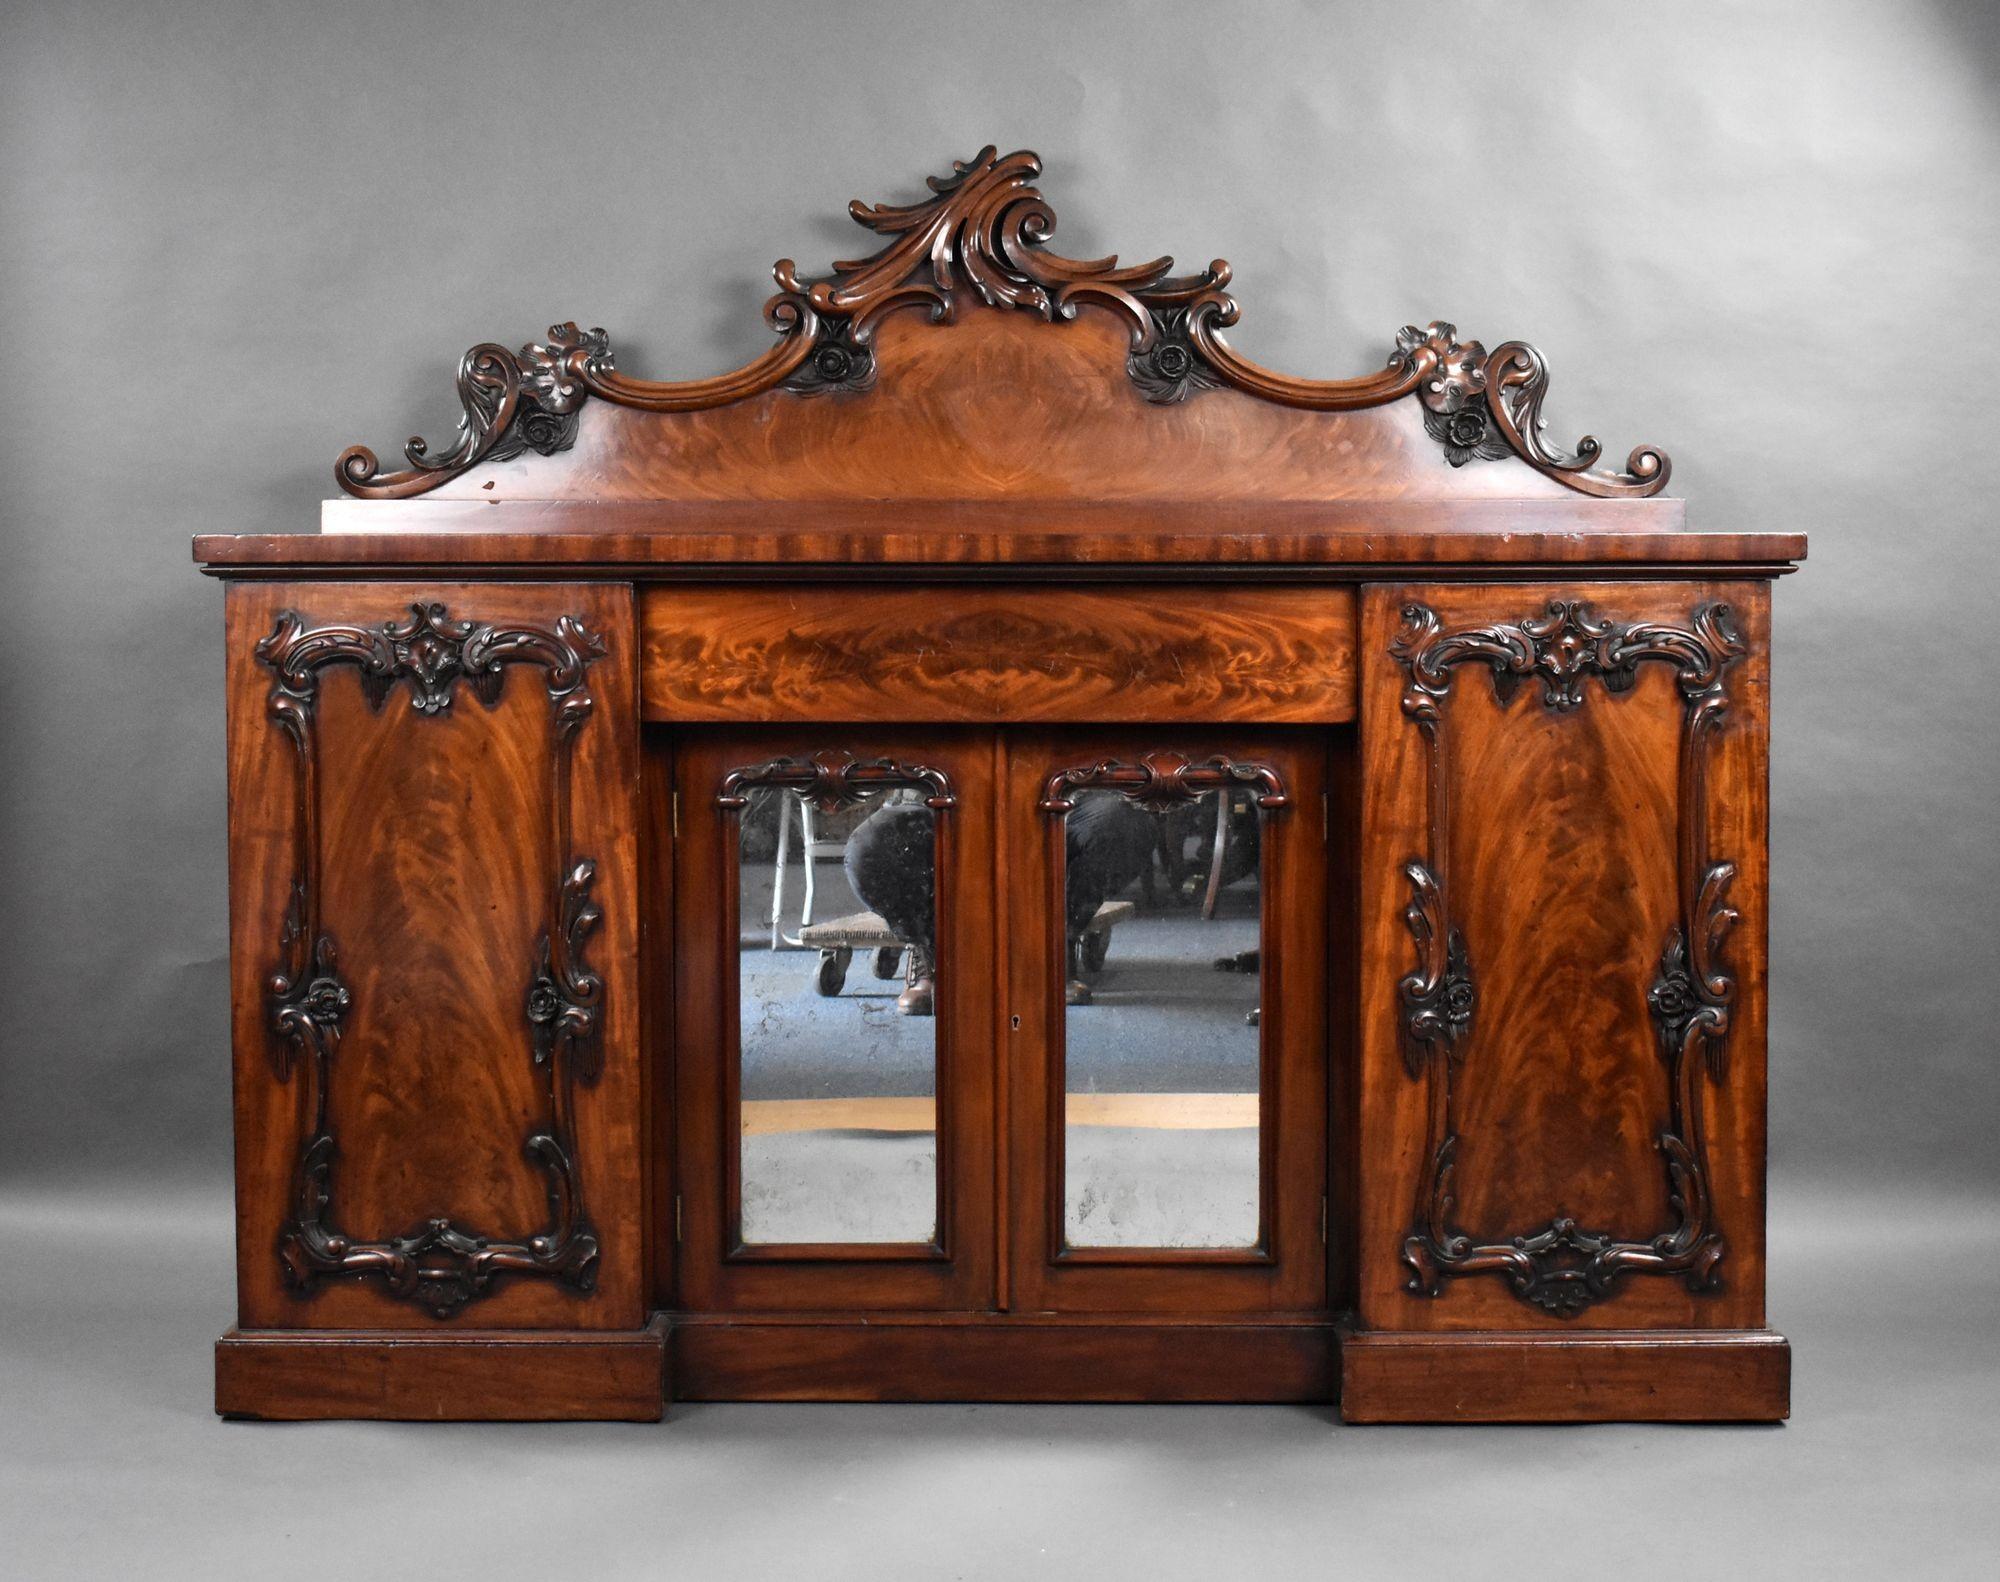 For sale is a good quality Victorian flame mahogany sideboard, having two mirror doors to the centre flanked by panel doors. The sideboard remains in very good ocndition for its age.

Width: 169cm Depth: 61cm Height: 144cm